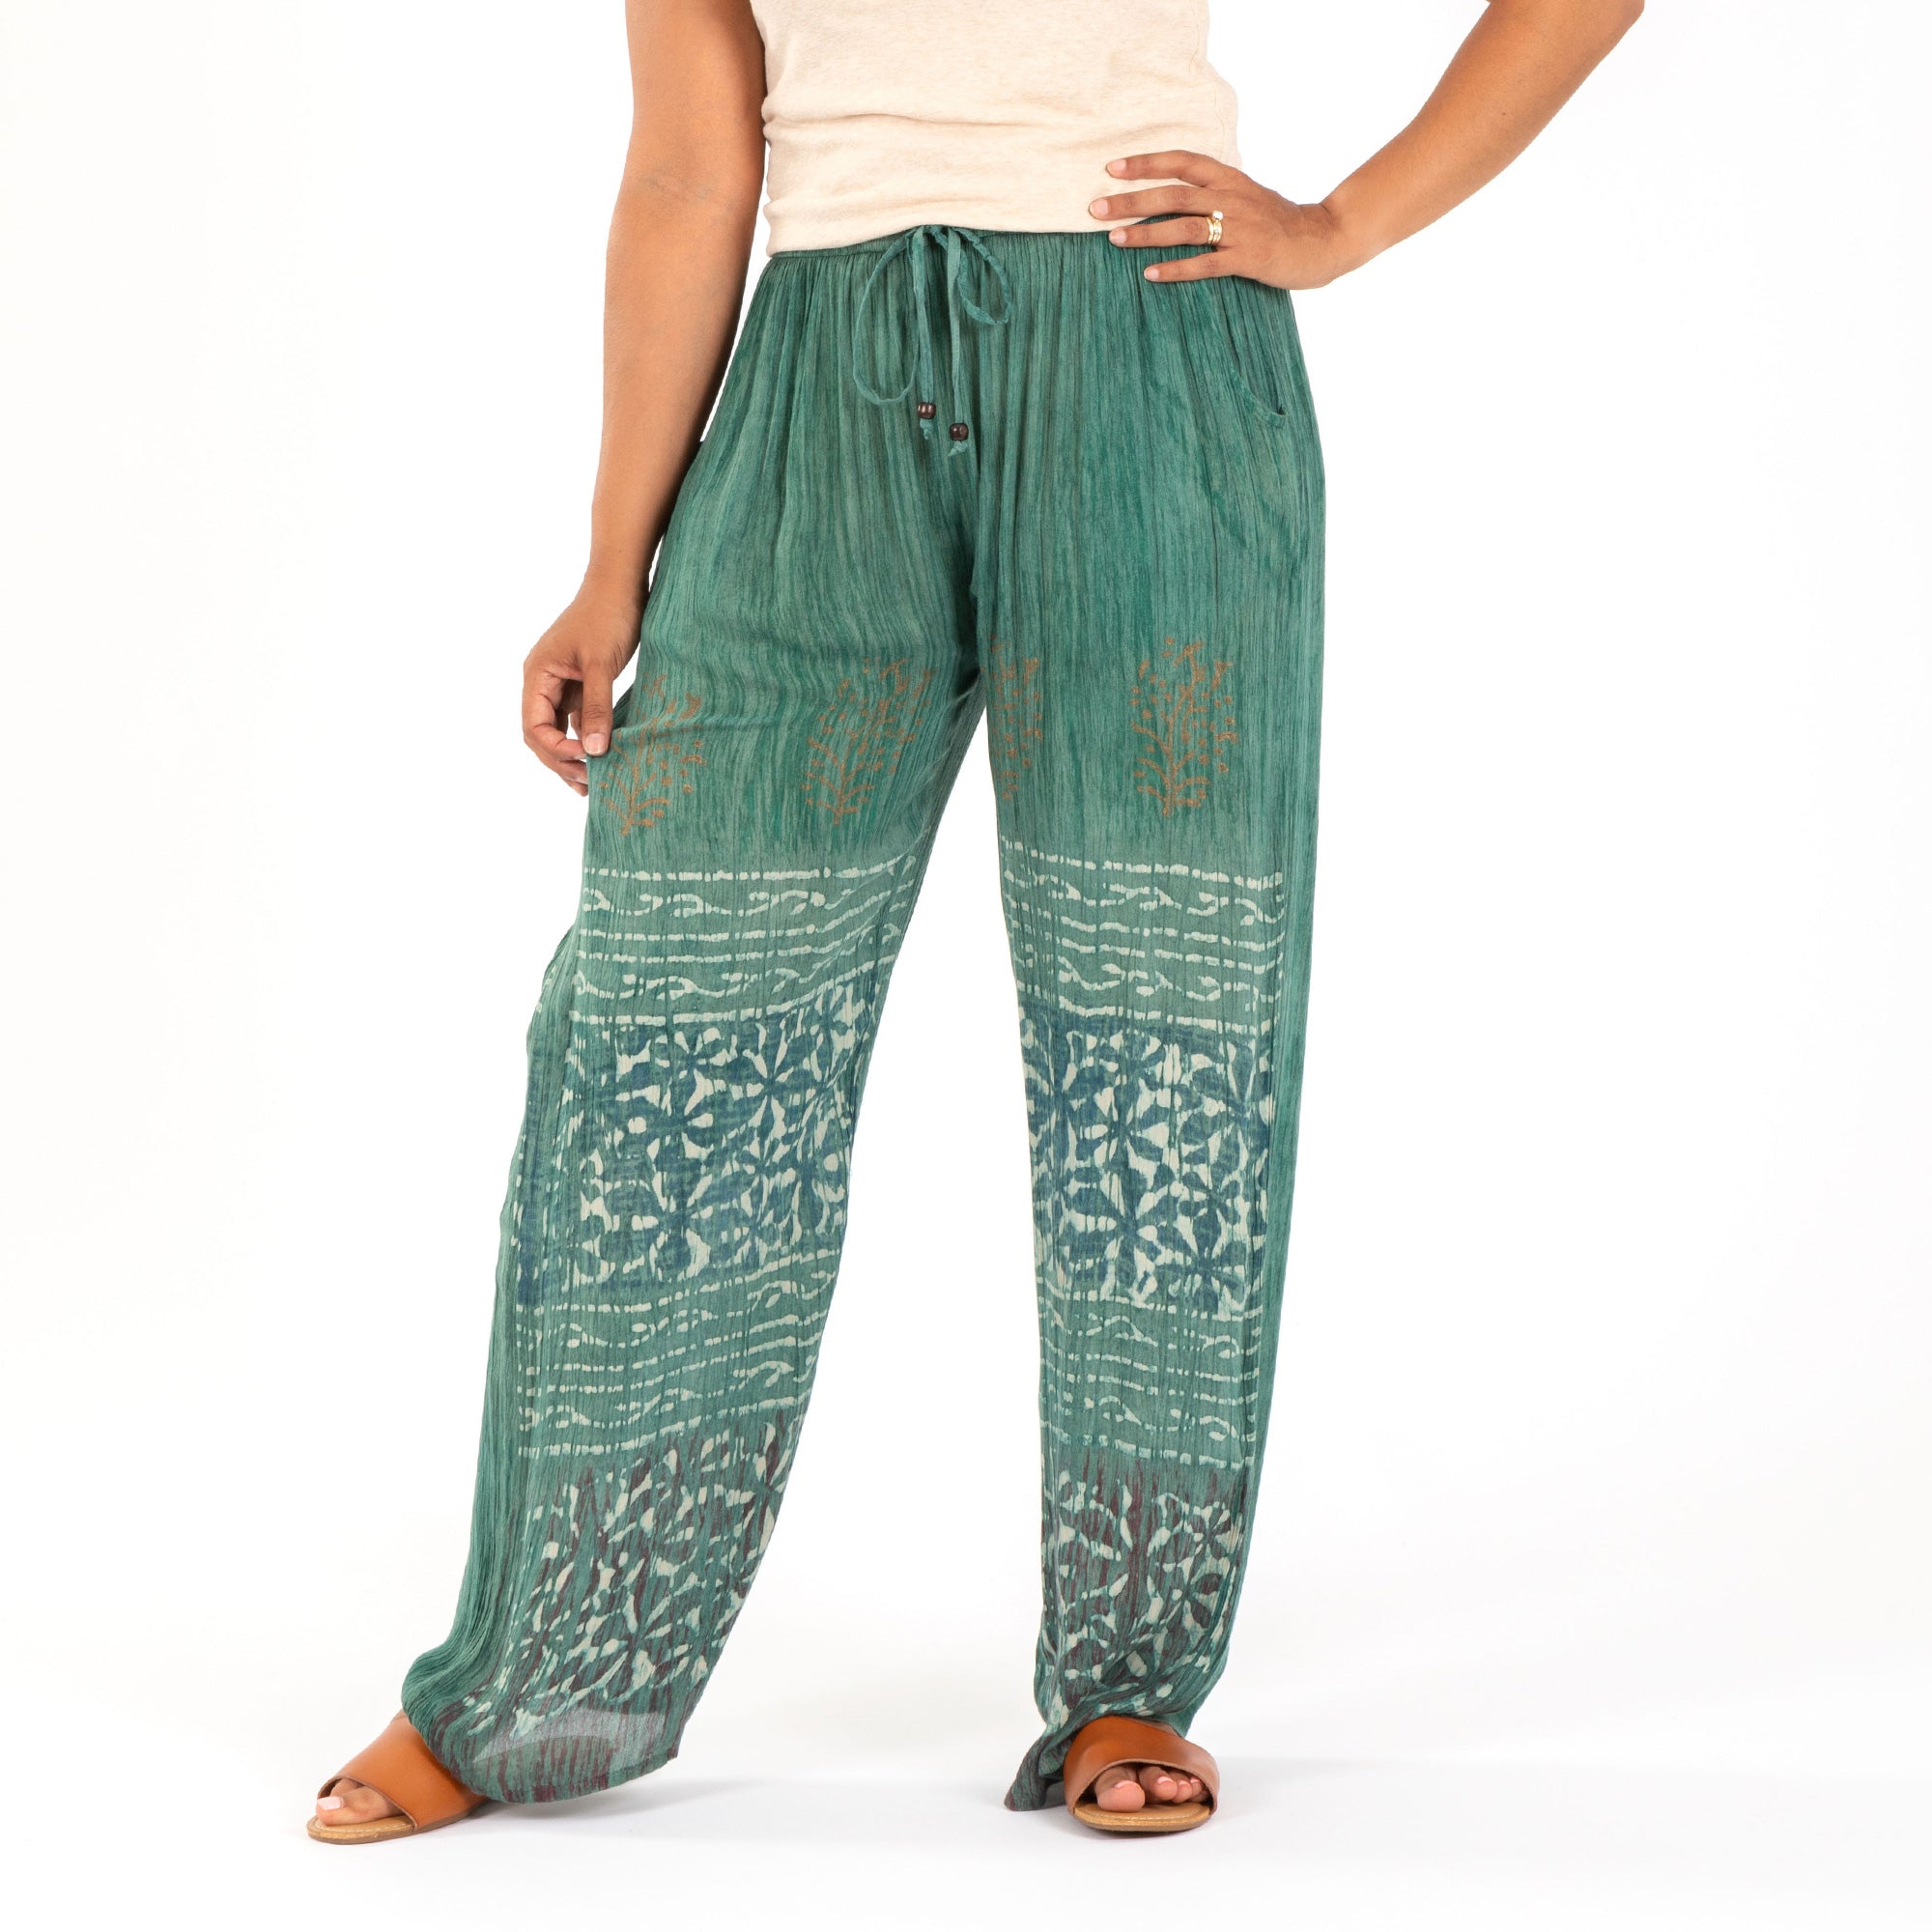 Women's Made To Move Casual Palazzo Pants & Top Set - Pants - Forest Green - 4X